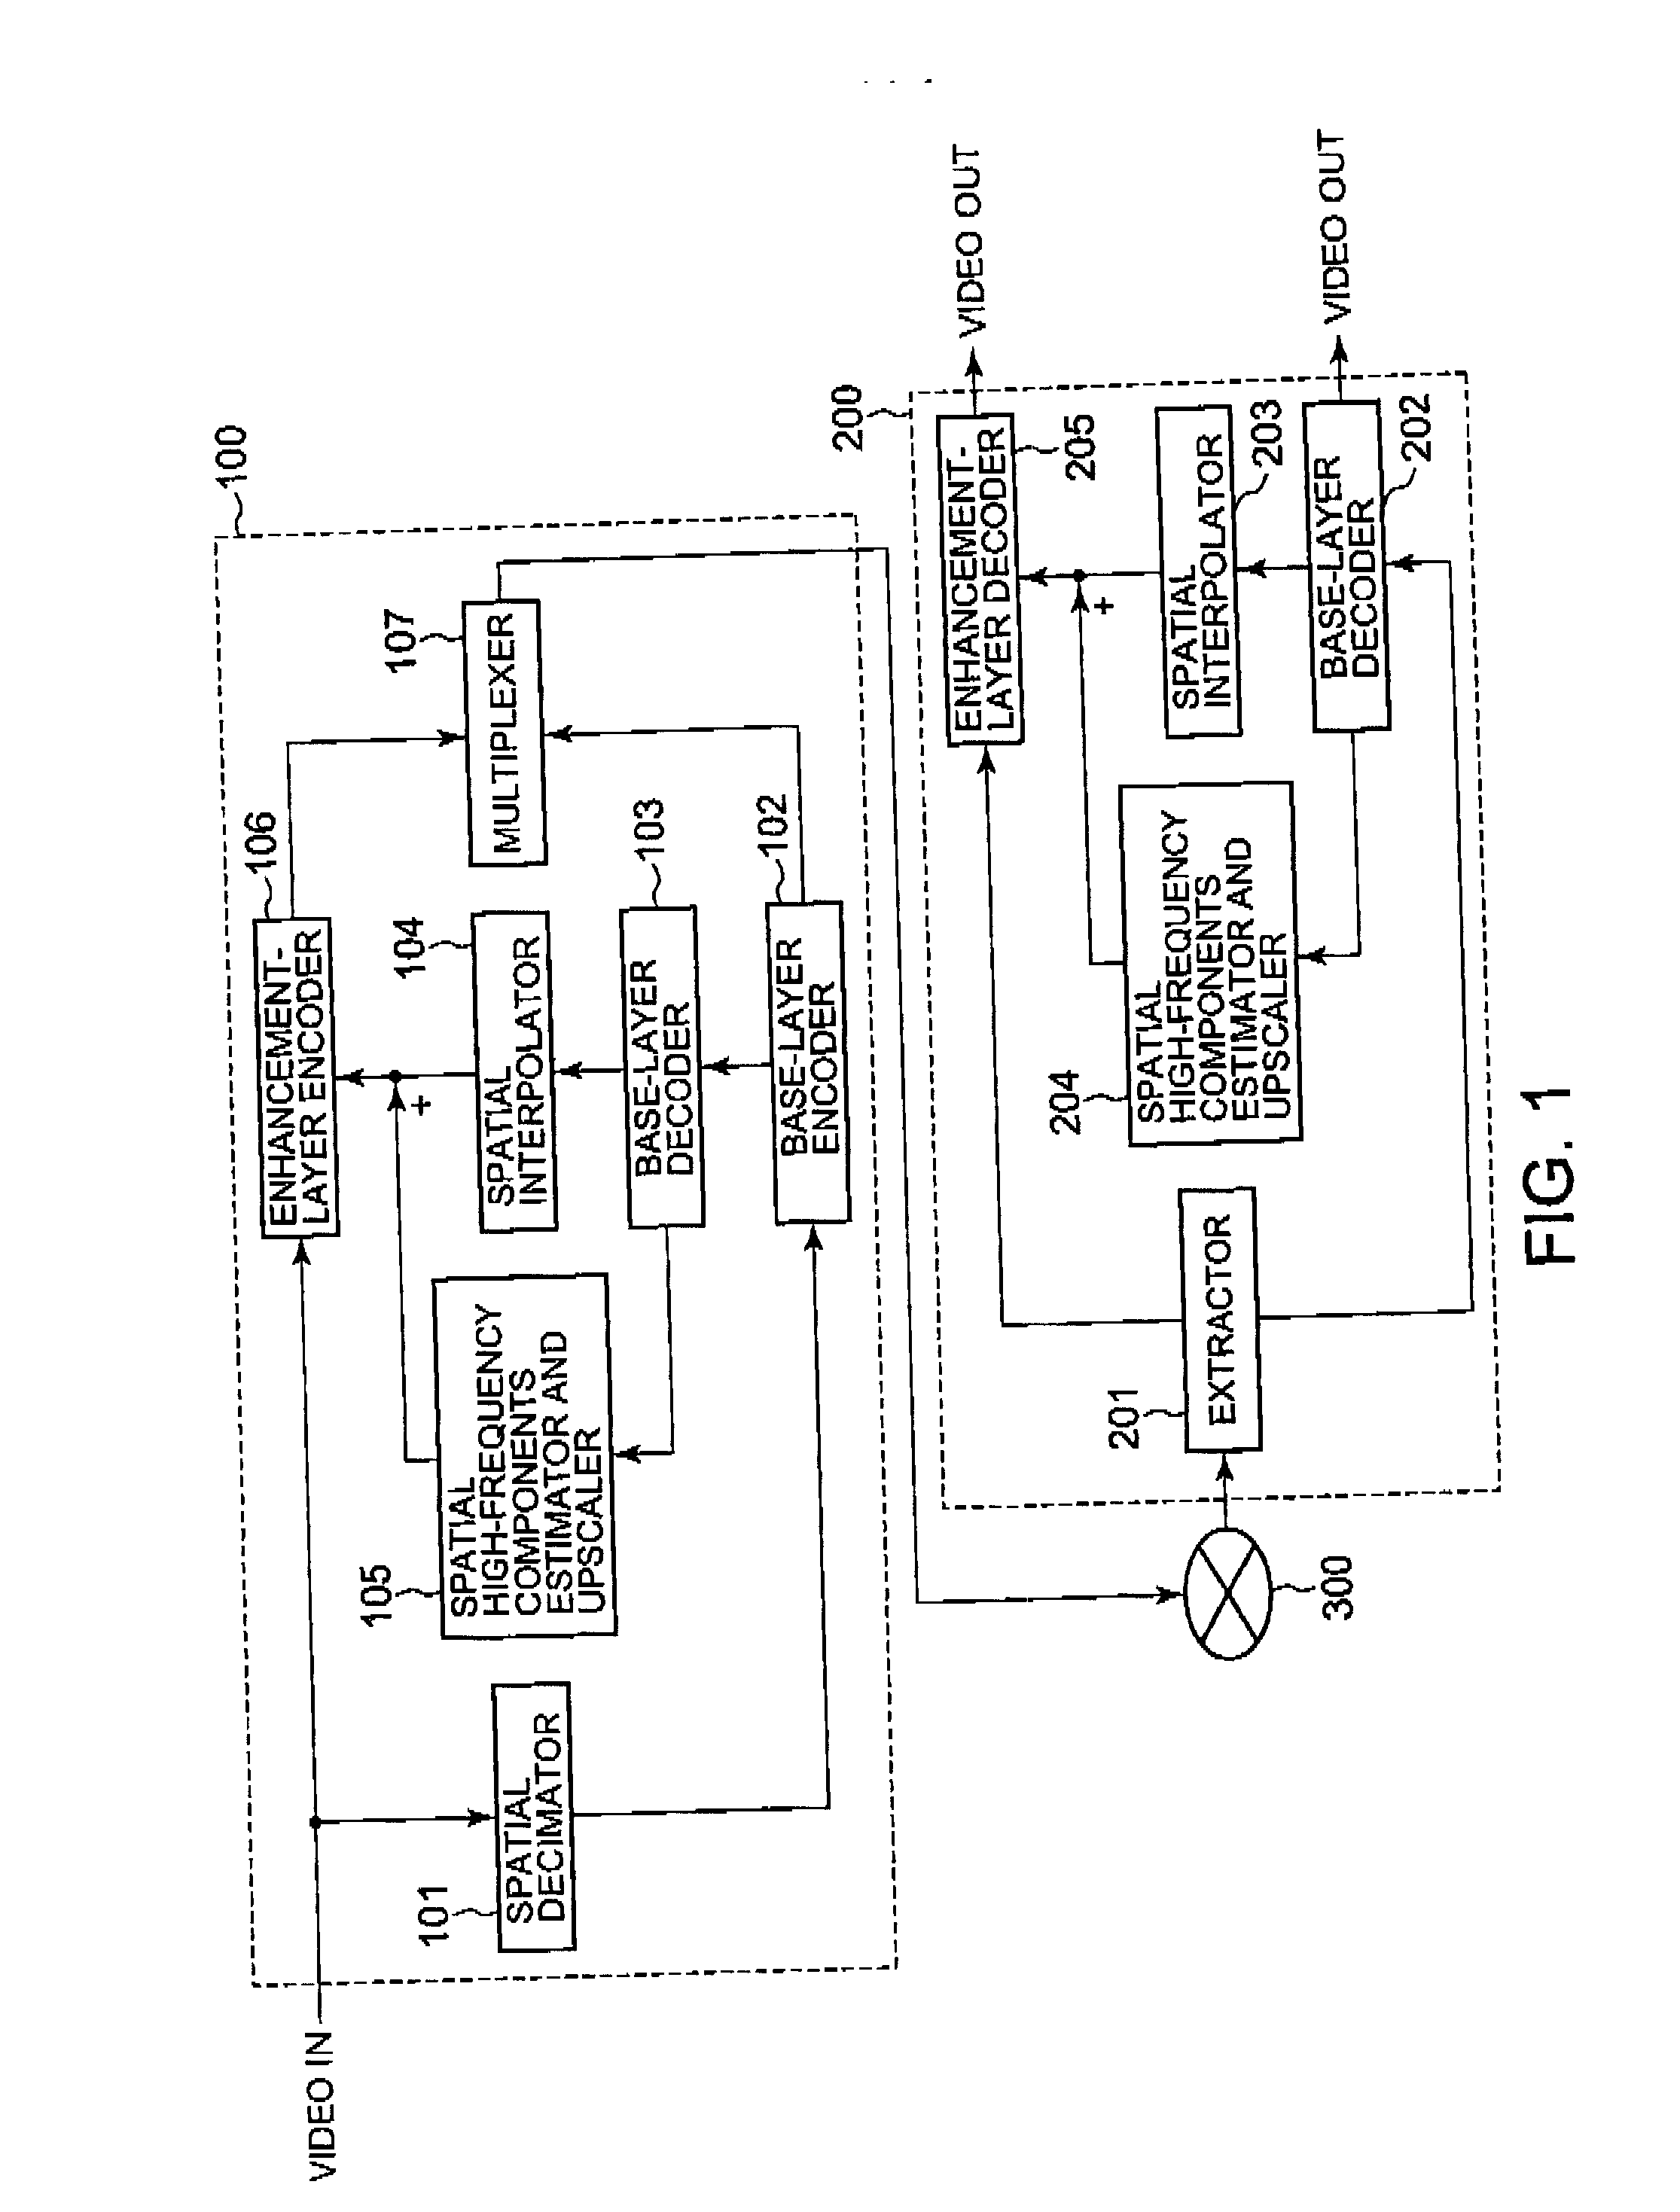 Moving-picture layered coding and decoding methods, apparatuses, and programs